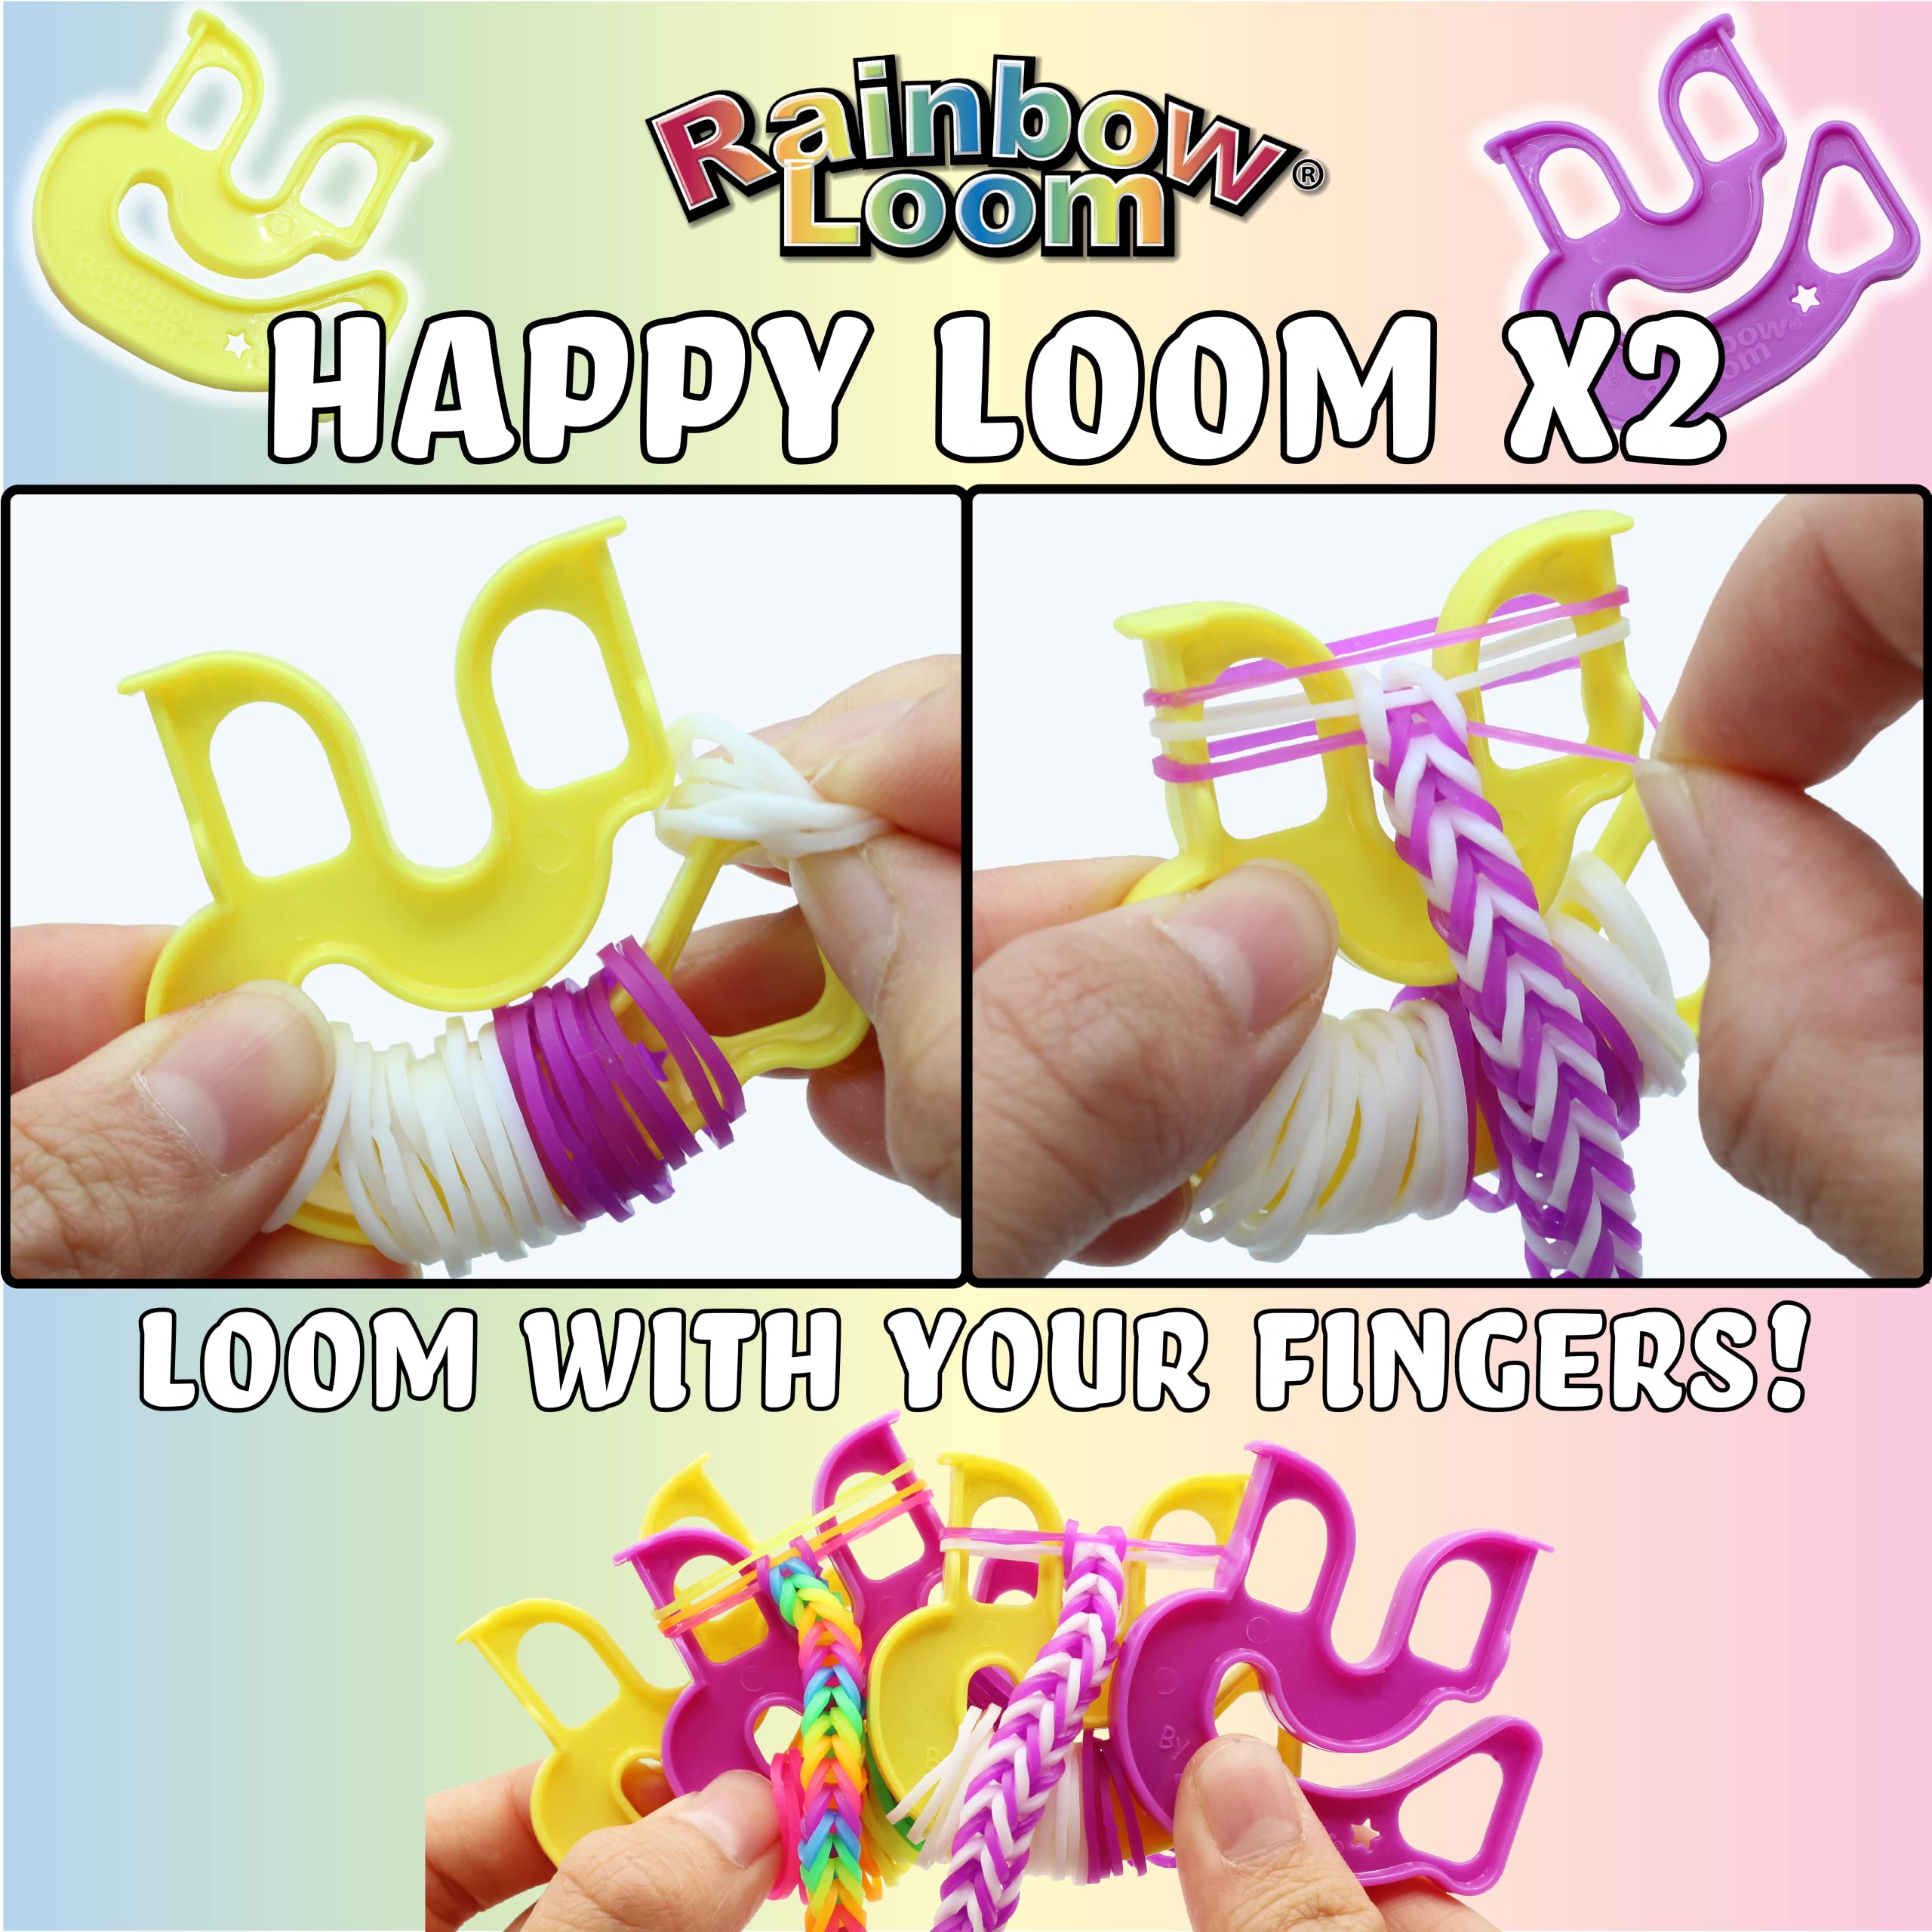 Rainbow Loom® Loomi-Pals™ MEGA Set, Features 60 CUTE Assorted LP Charms, the NEW RL2.0, Happy Looms, Hooks, Alpha & Pony Beads, 5600 Colorful Bands all in a Carrying Case for Boys and Girls 7+